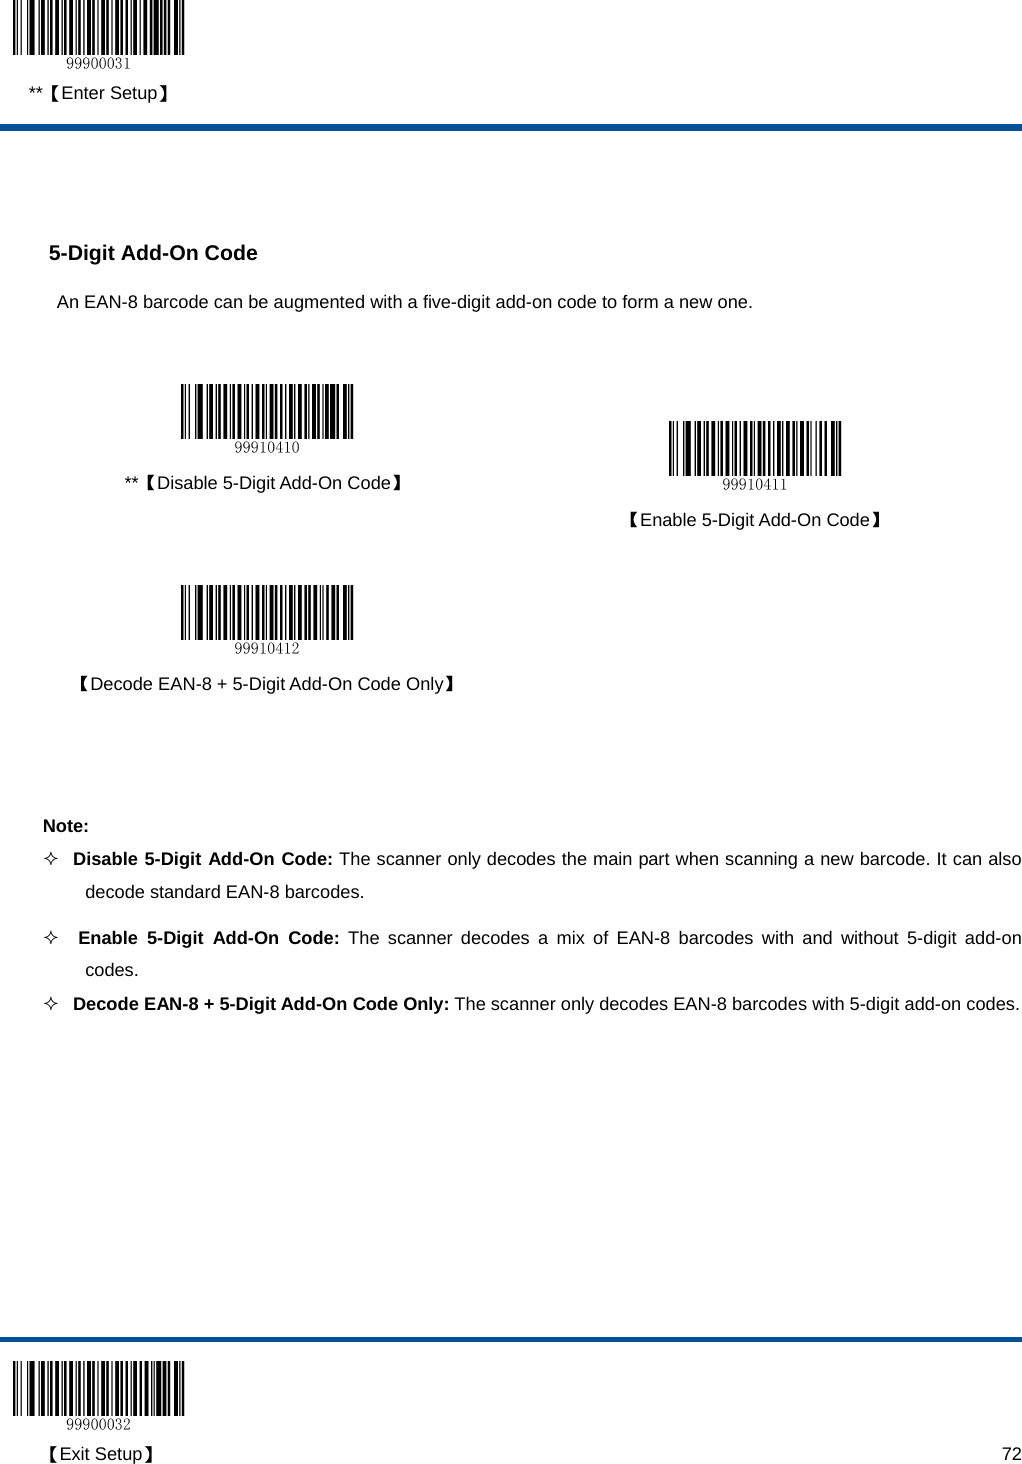  **【Enter Setup】  【Exit Setup】                                                                                                                                                                      72   5-Digit Add-On Code An EAN-8 barcode can be augmented with a five-digit add-on code to form a new one.    **【Disable 5-Digit Add-On Code】   【Enable 5-Digit Add-On Code】     【Decode EAN-8 + 5-Digit Add-On Code Only】    Note:  Disable 5-Digit Add-On Code: The scanner only decodes the main part when scanning a new barcode. It can also decode standard EAN-8 barcodes.   Enable 5-Digit Add-On Code: The scanner decodes a mix of EAN-8 barcodes with and without 5-digit add-on codes.  Decode EAN-8 + 5-Digit Add-On Code Only: The scanner only decodes EAN-8 barcodes with 5-digit add-on codes. 